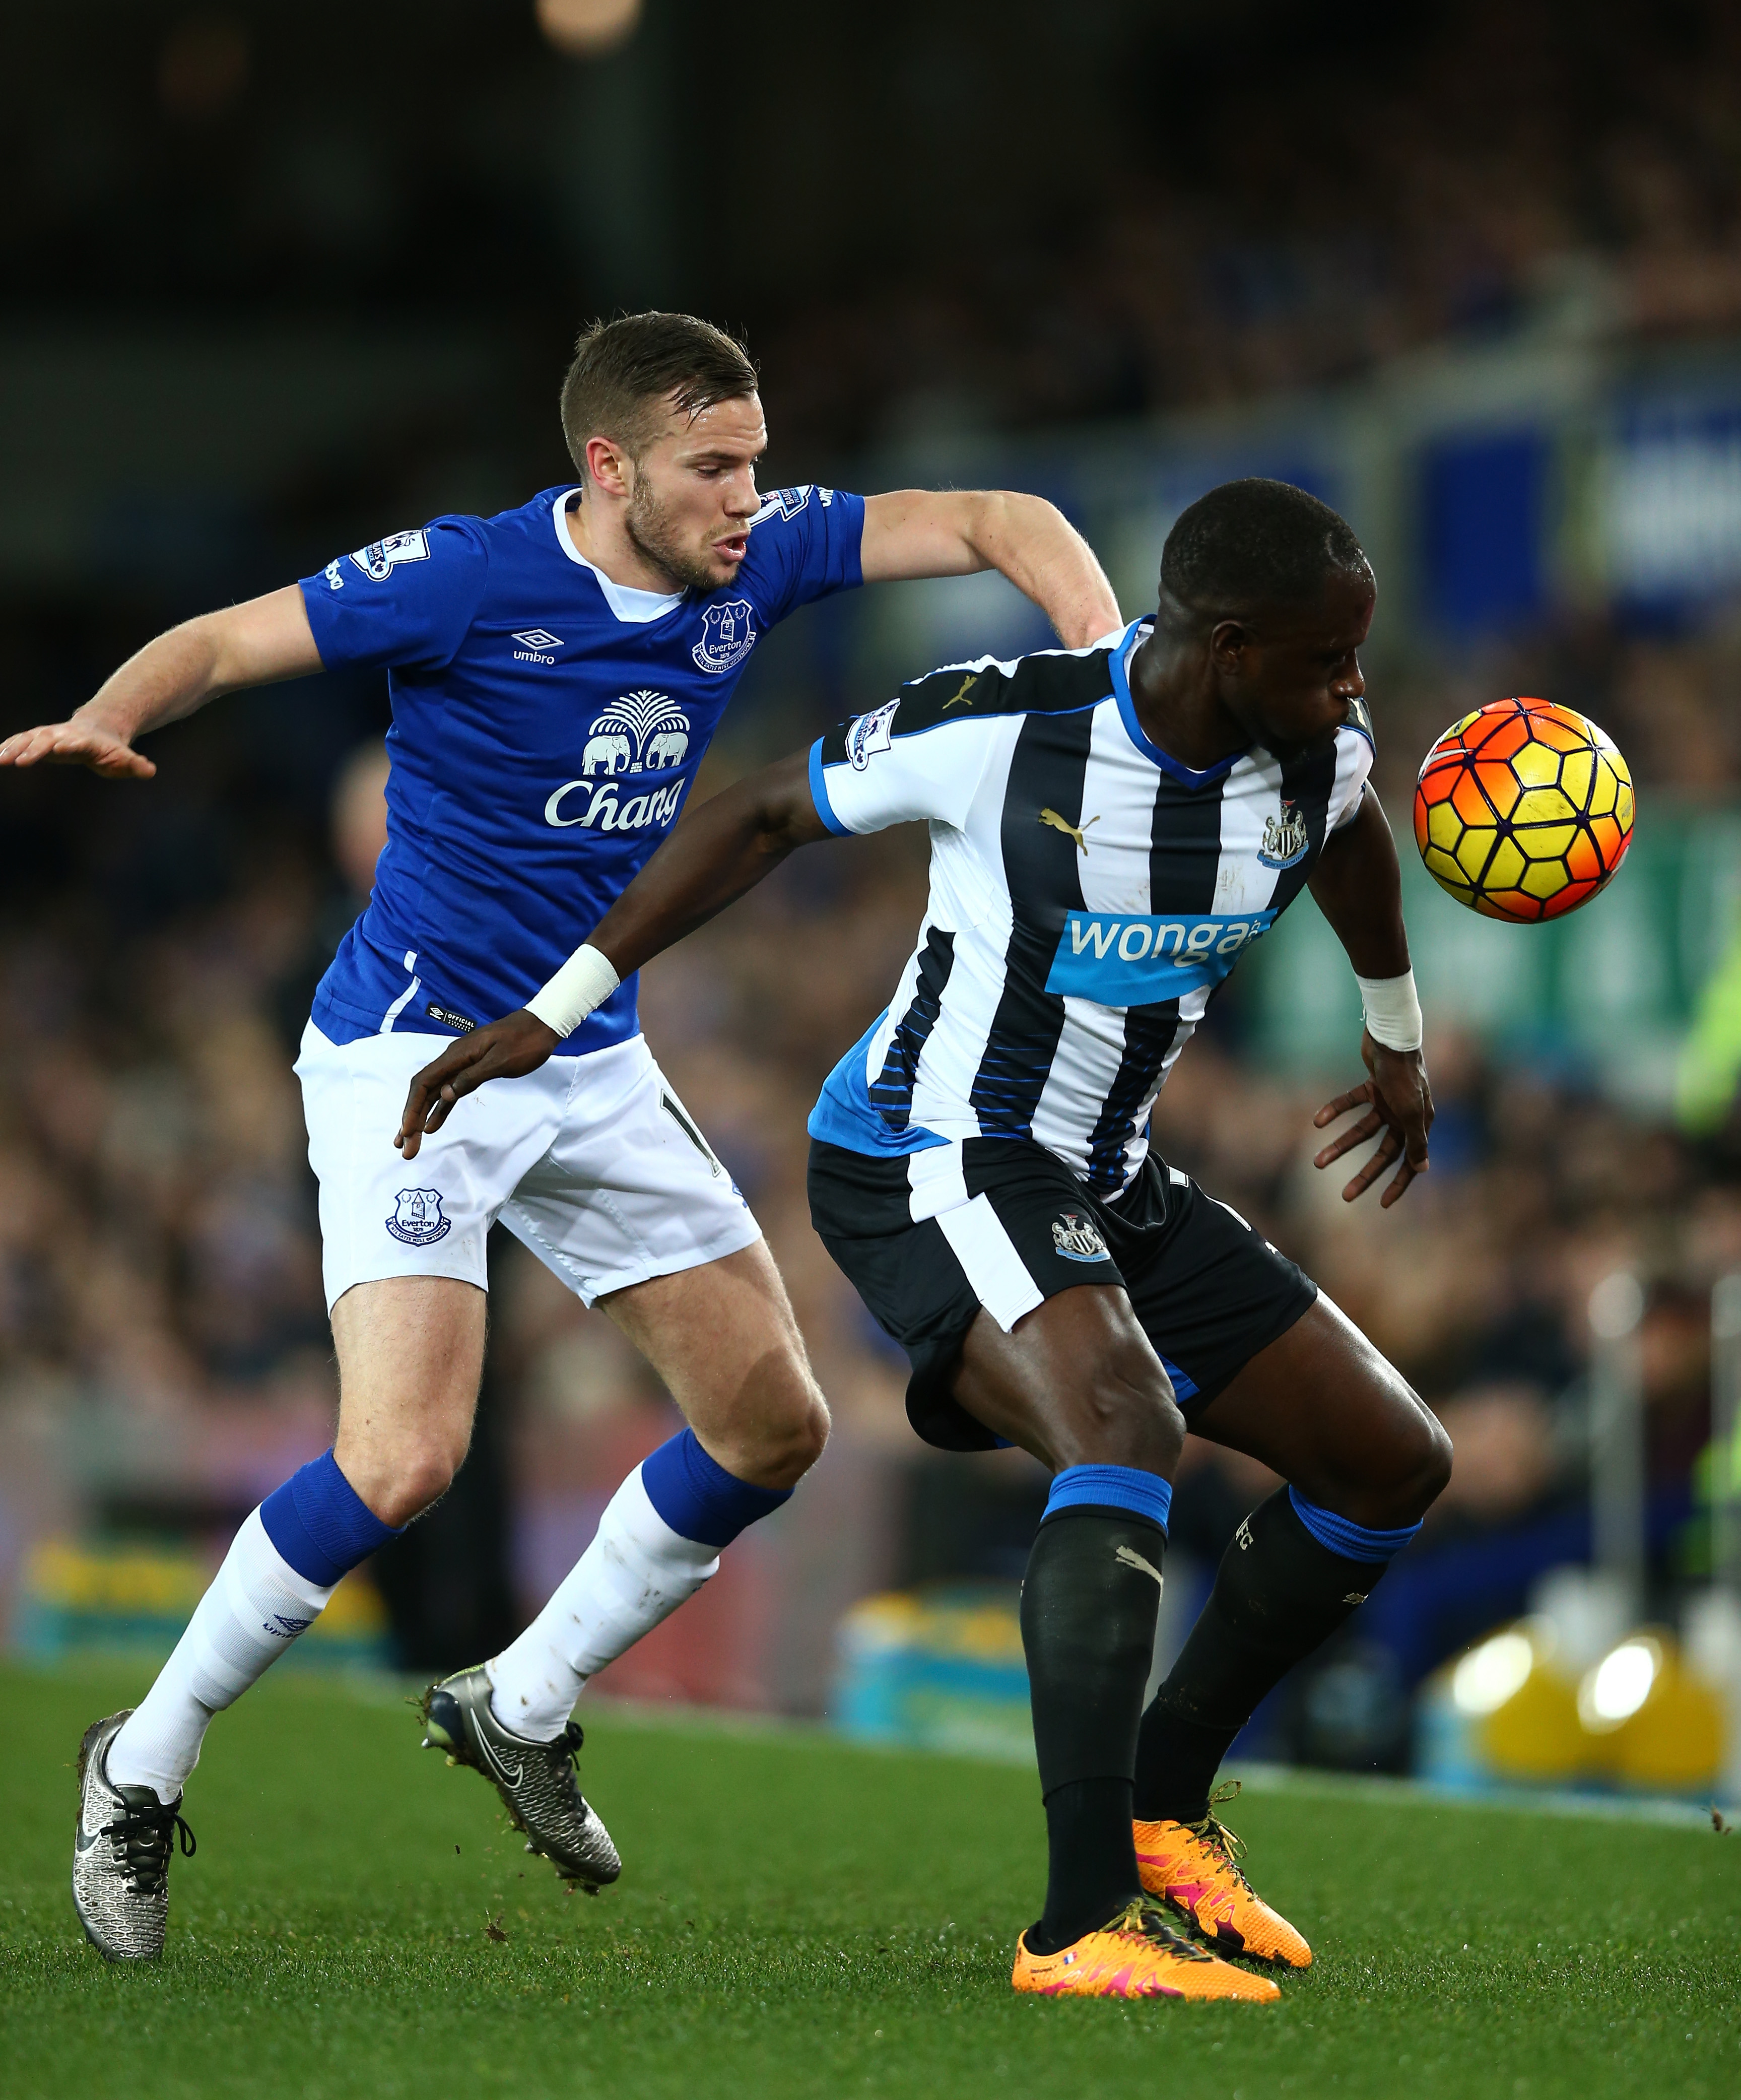 Tom Cleverley chases down Moussa Sissoko, a common occurrence from Wednesday's victory.